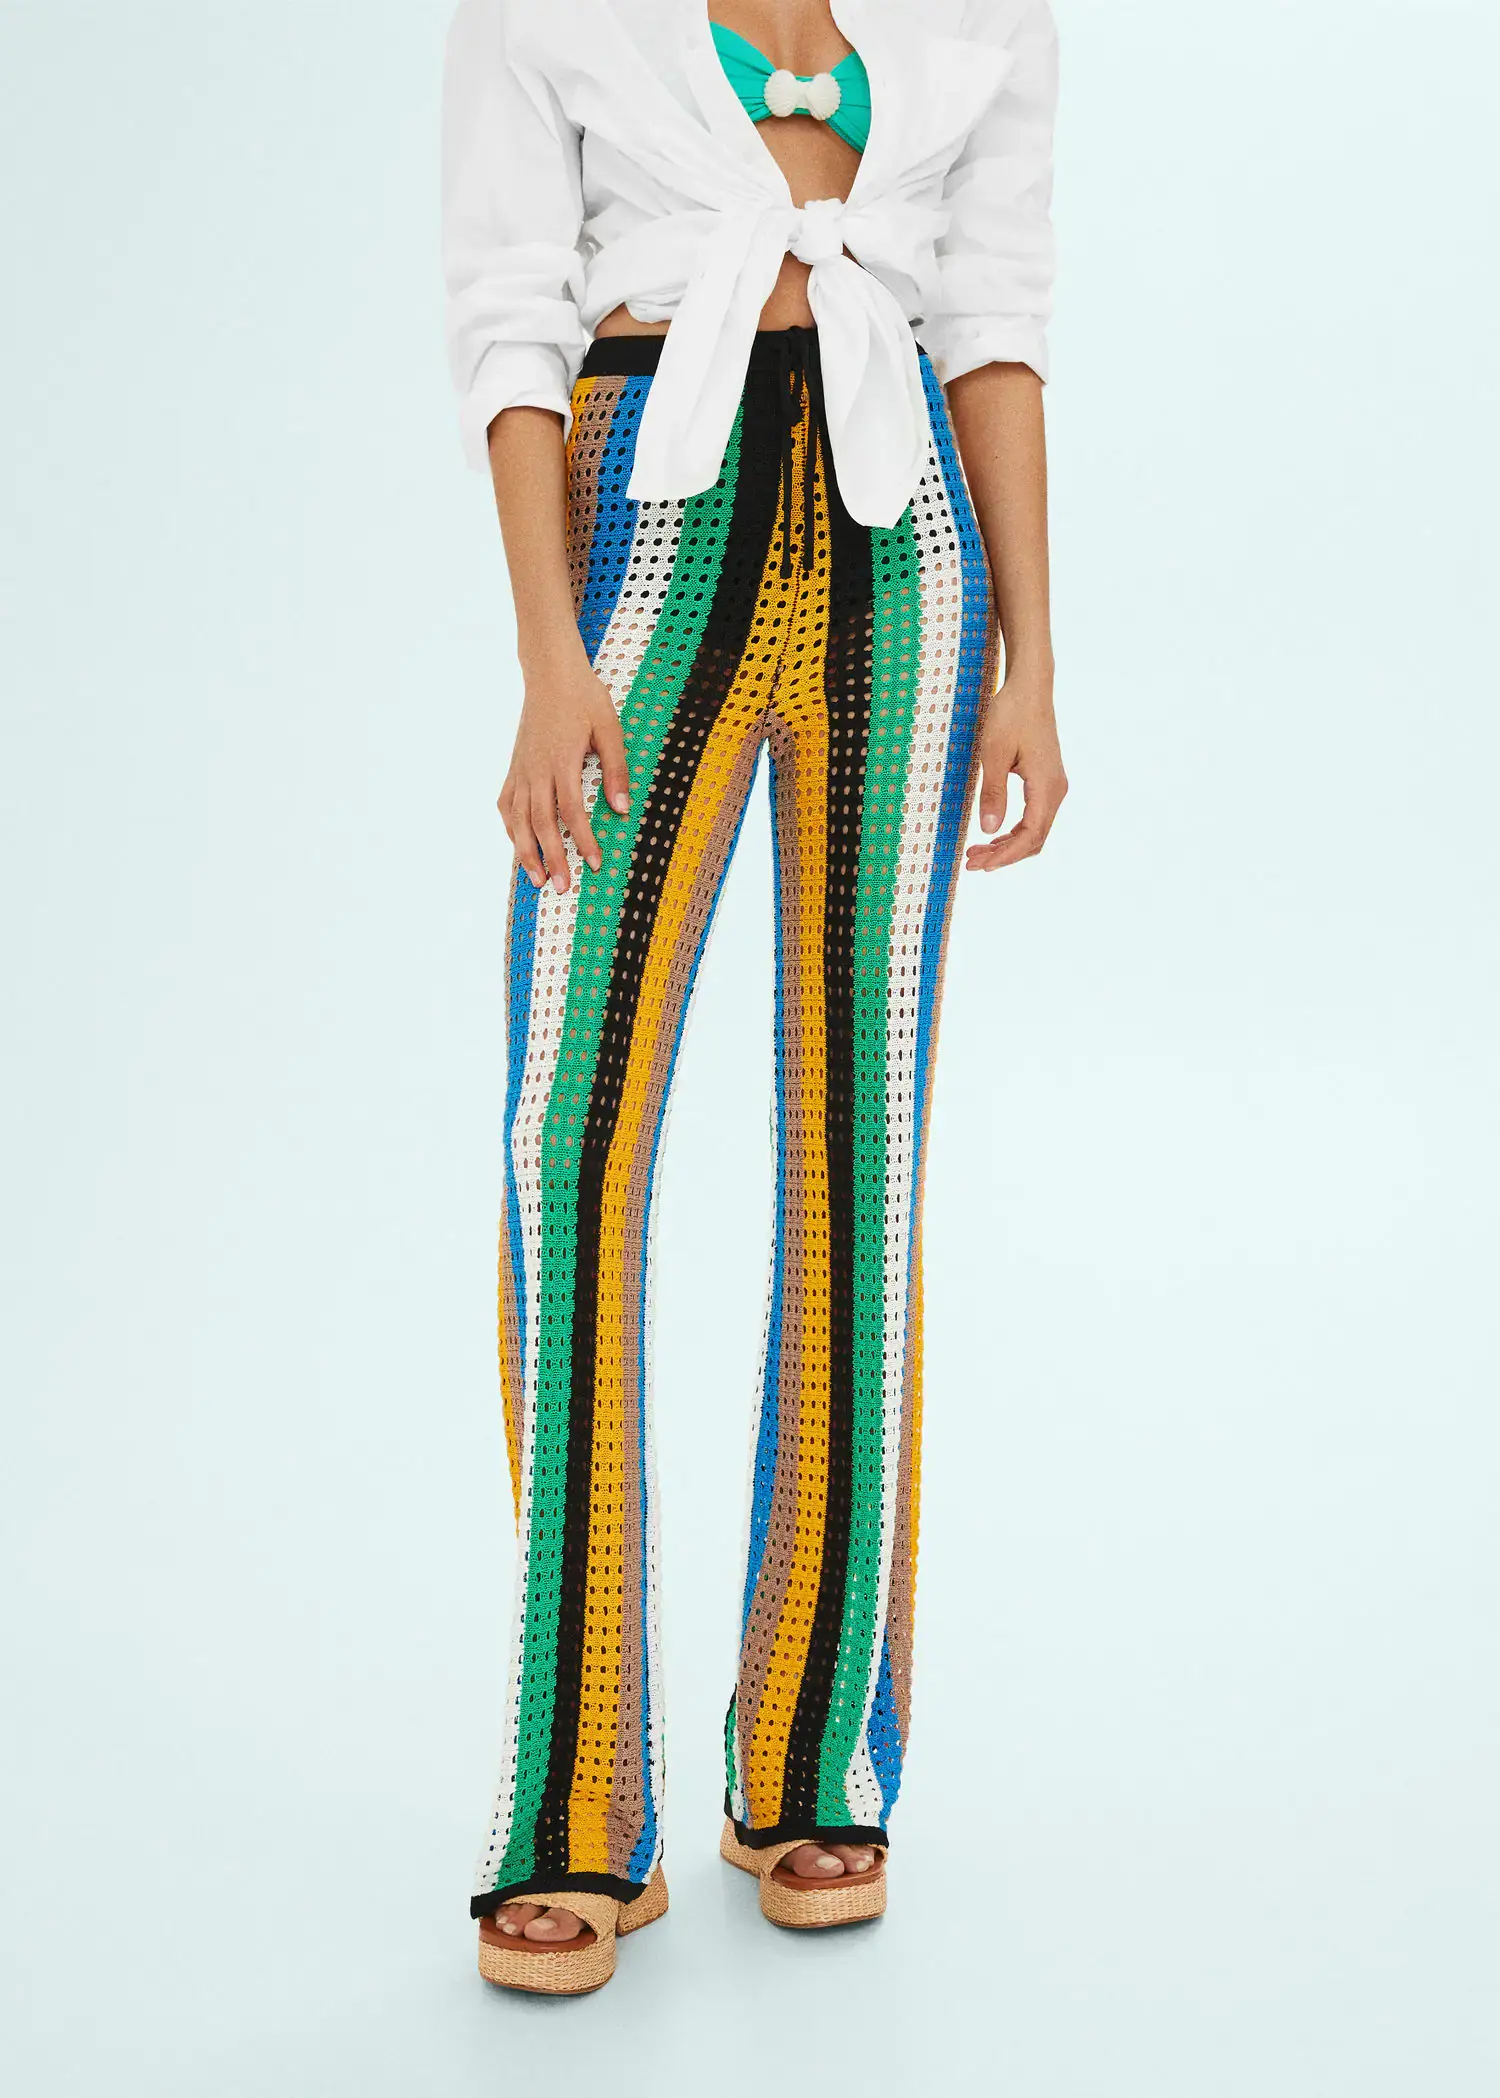 Mango Openwork knit trousers. a woman wearing a white shirt and colorful pants. 